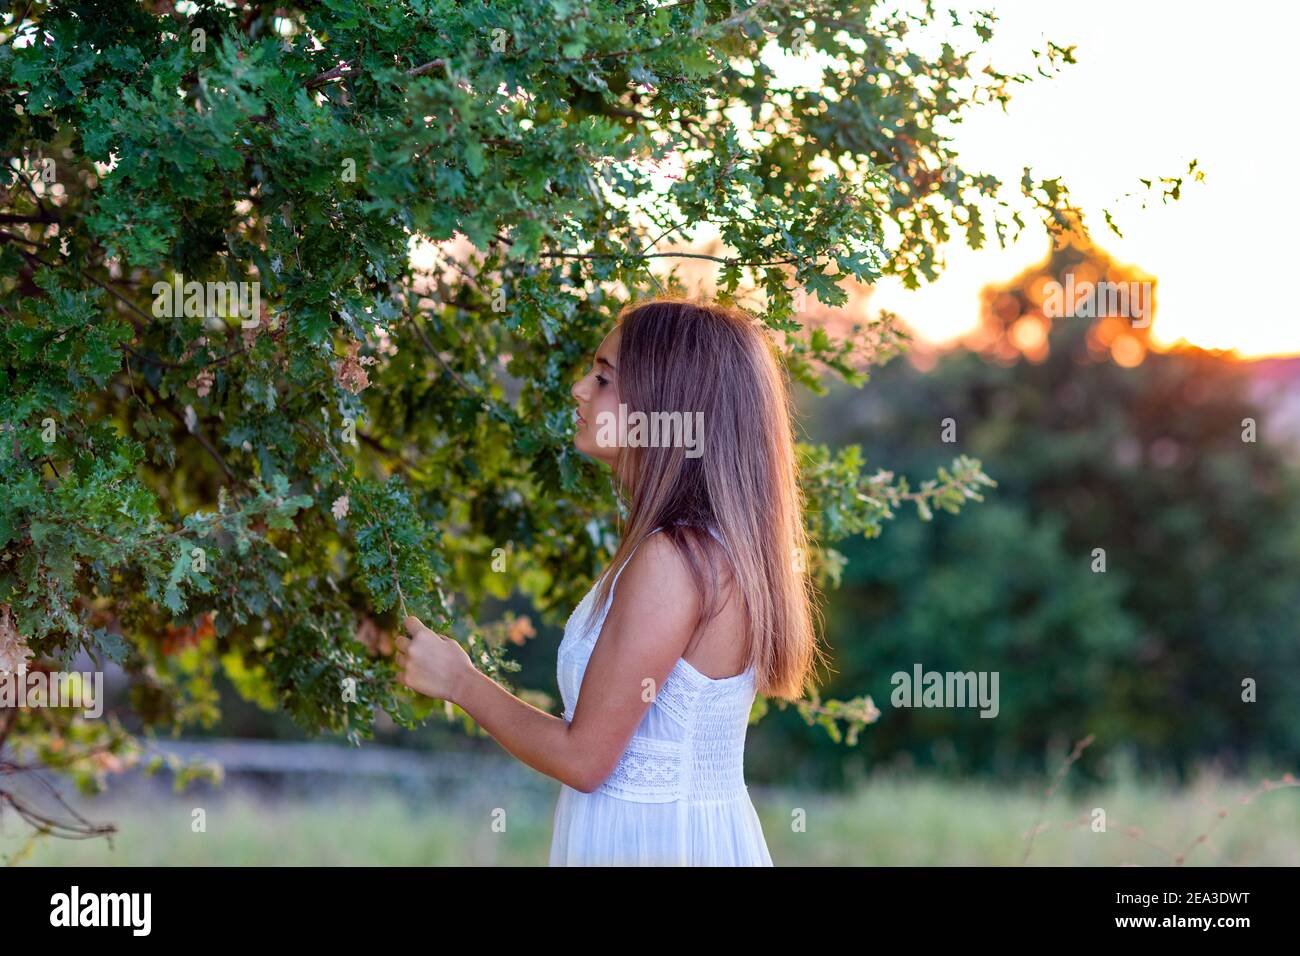 Profile of a young girl in white dress at sunset with blond long hair touching the magic tree Stock Photo